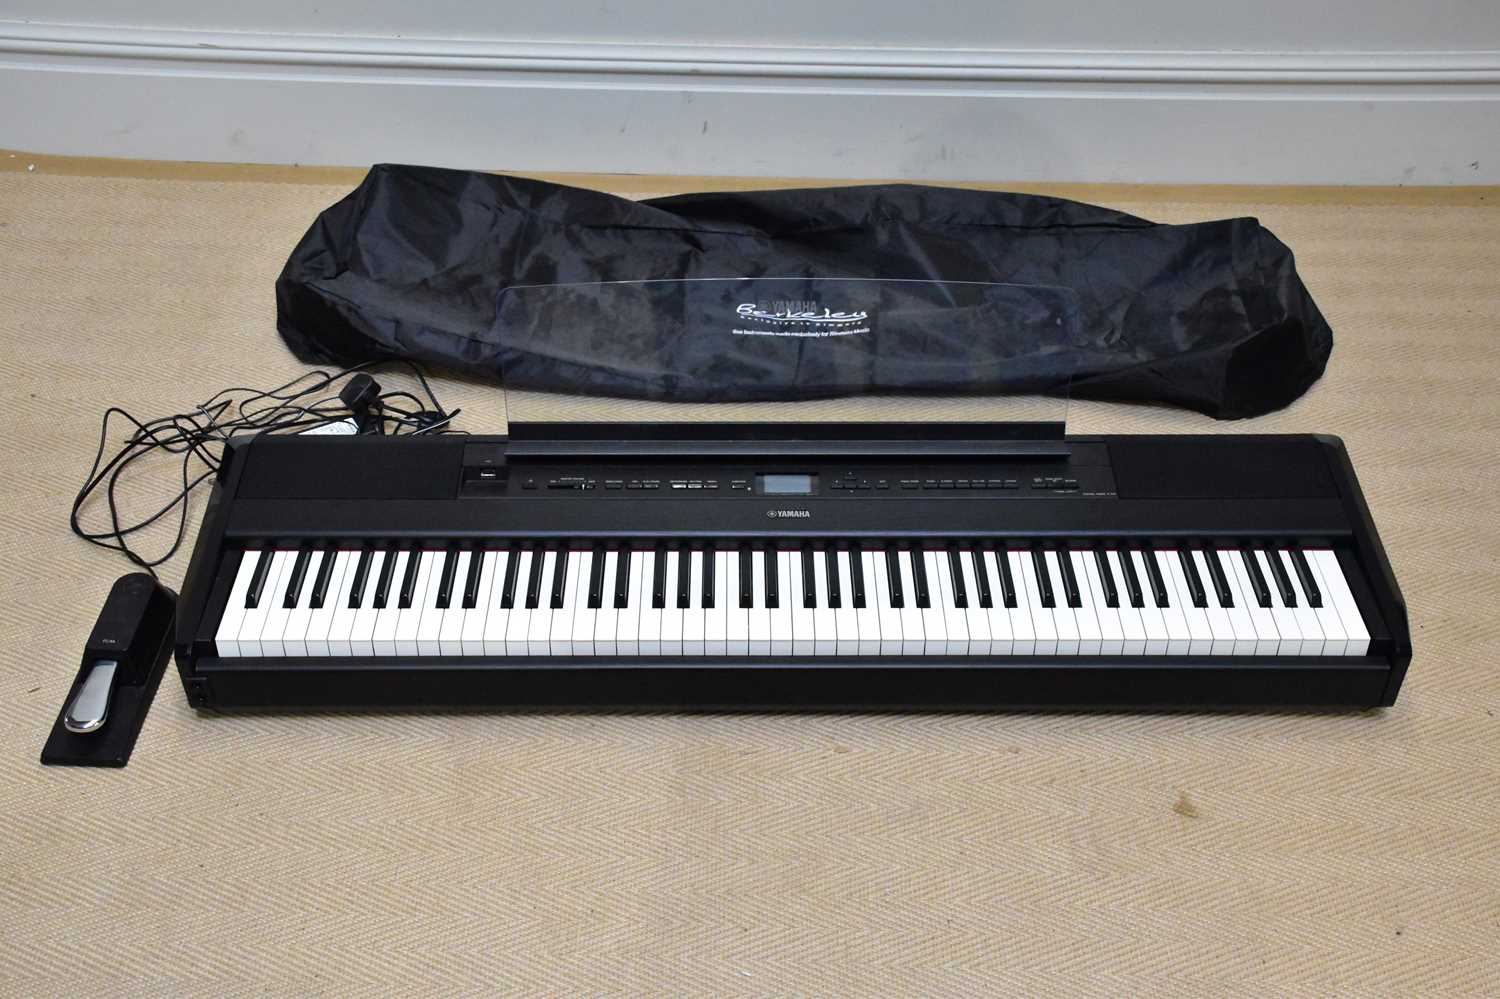 A Yamaha P-515 digital piano. Condition Report: Powers on at this time and is in good over all